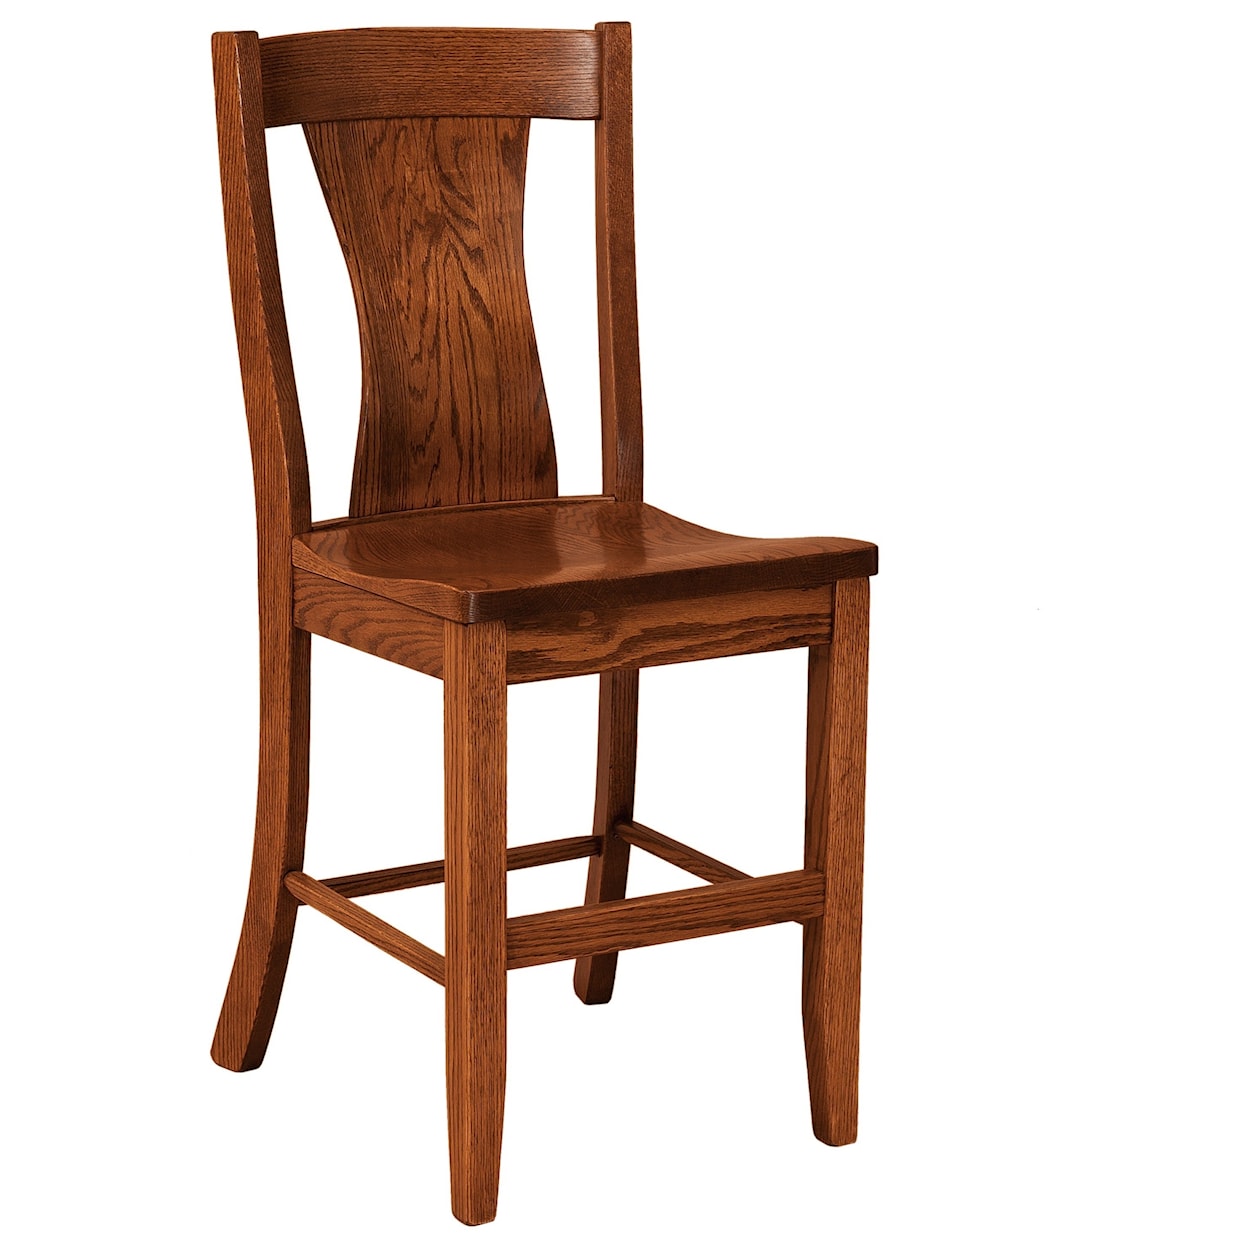 F&N Woodworking Westin Stationary Counter Height Stool - Wood Seat